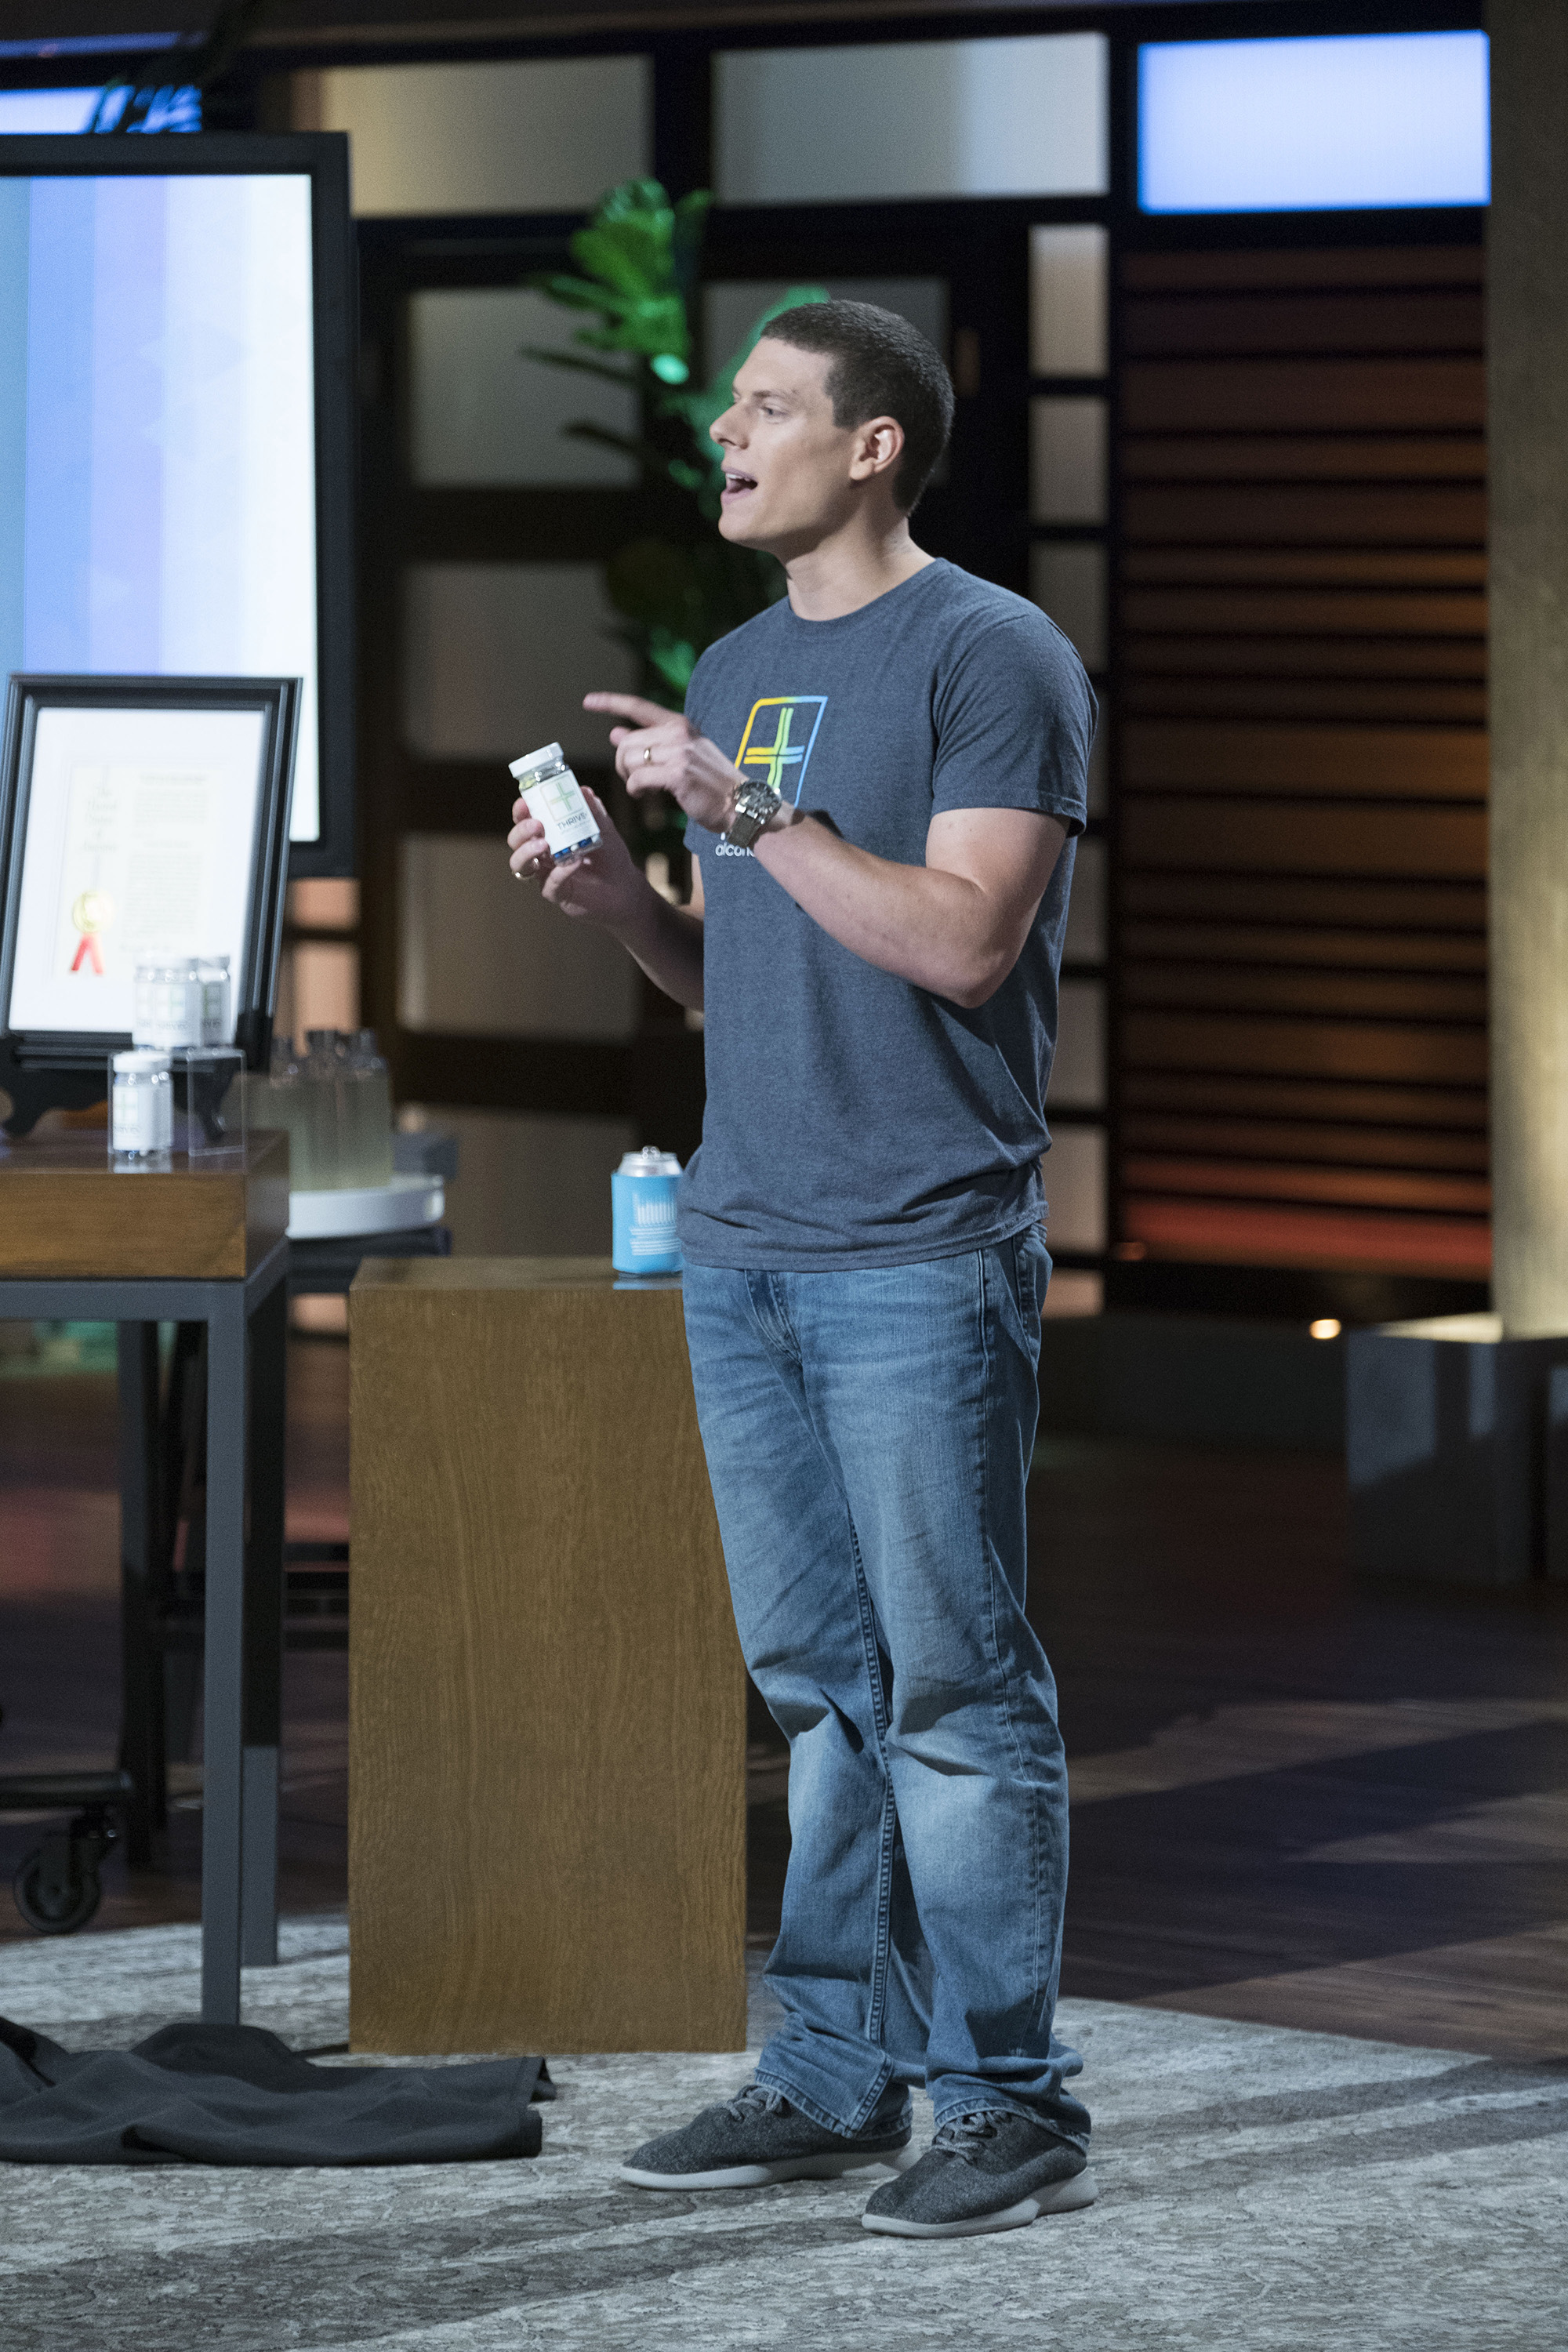 Brooks Powell of Thrive Plus pitching on ABC's Shark Tank.